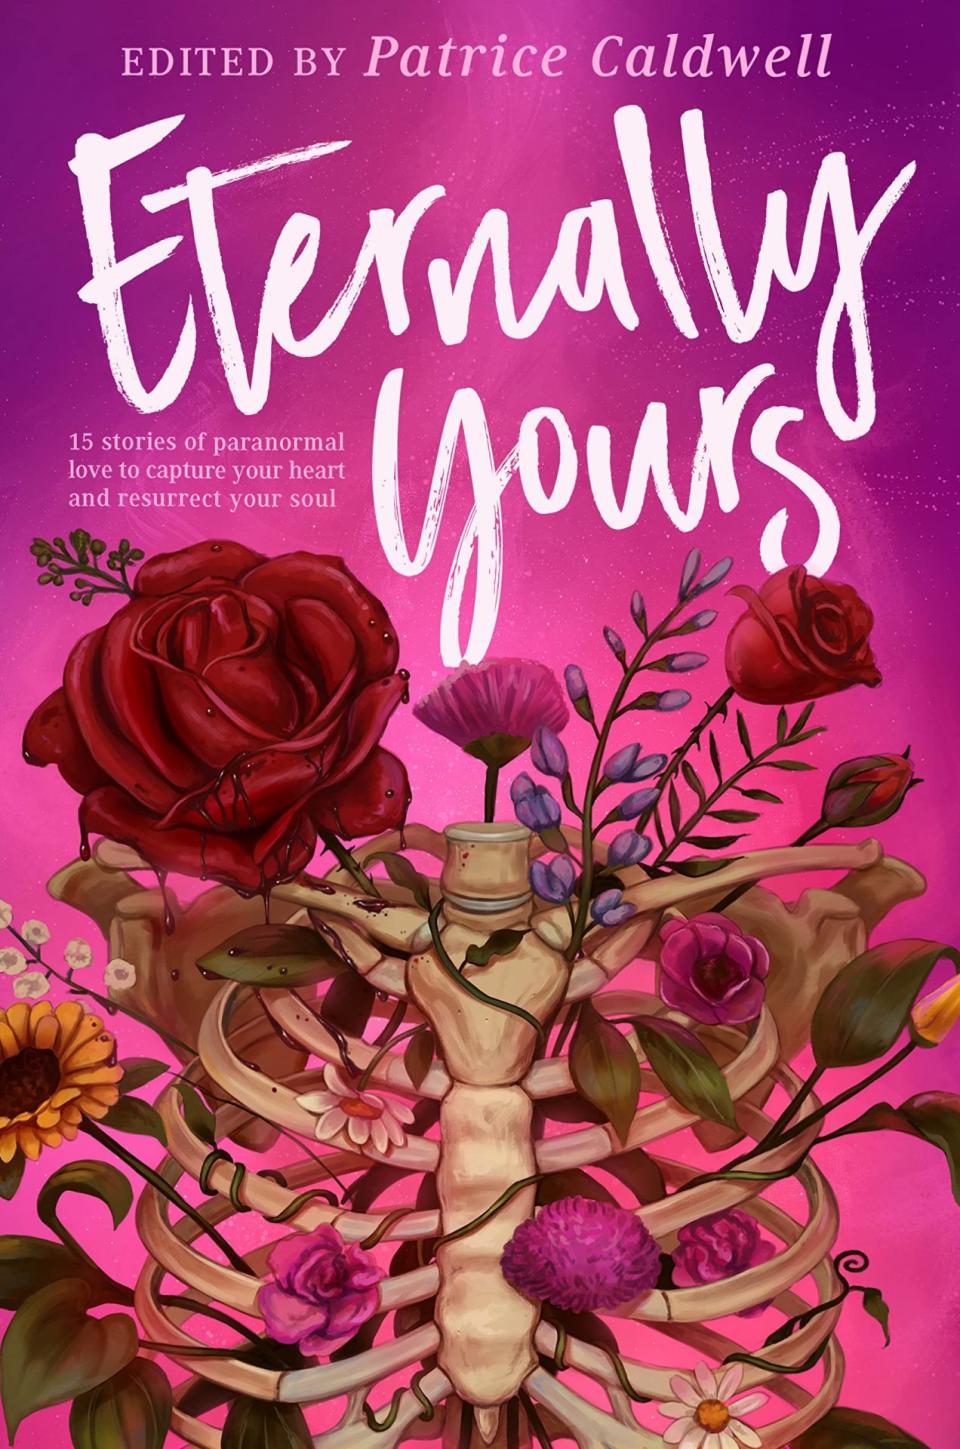 The cover for Eternally Yours shows a ribcage with flowers growing out of it